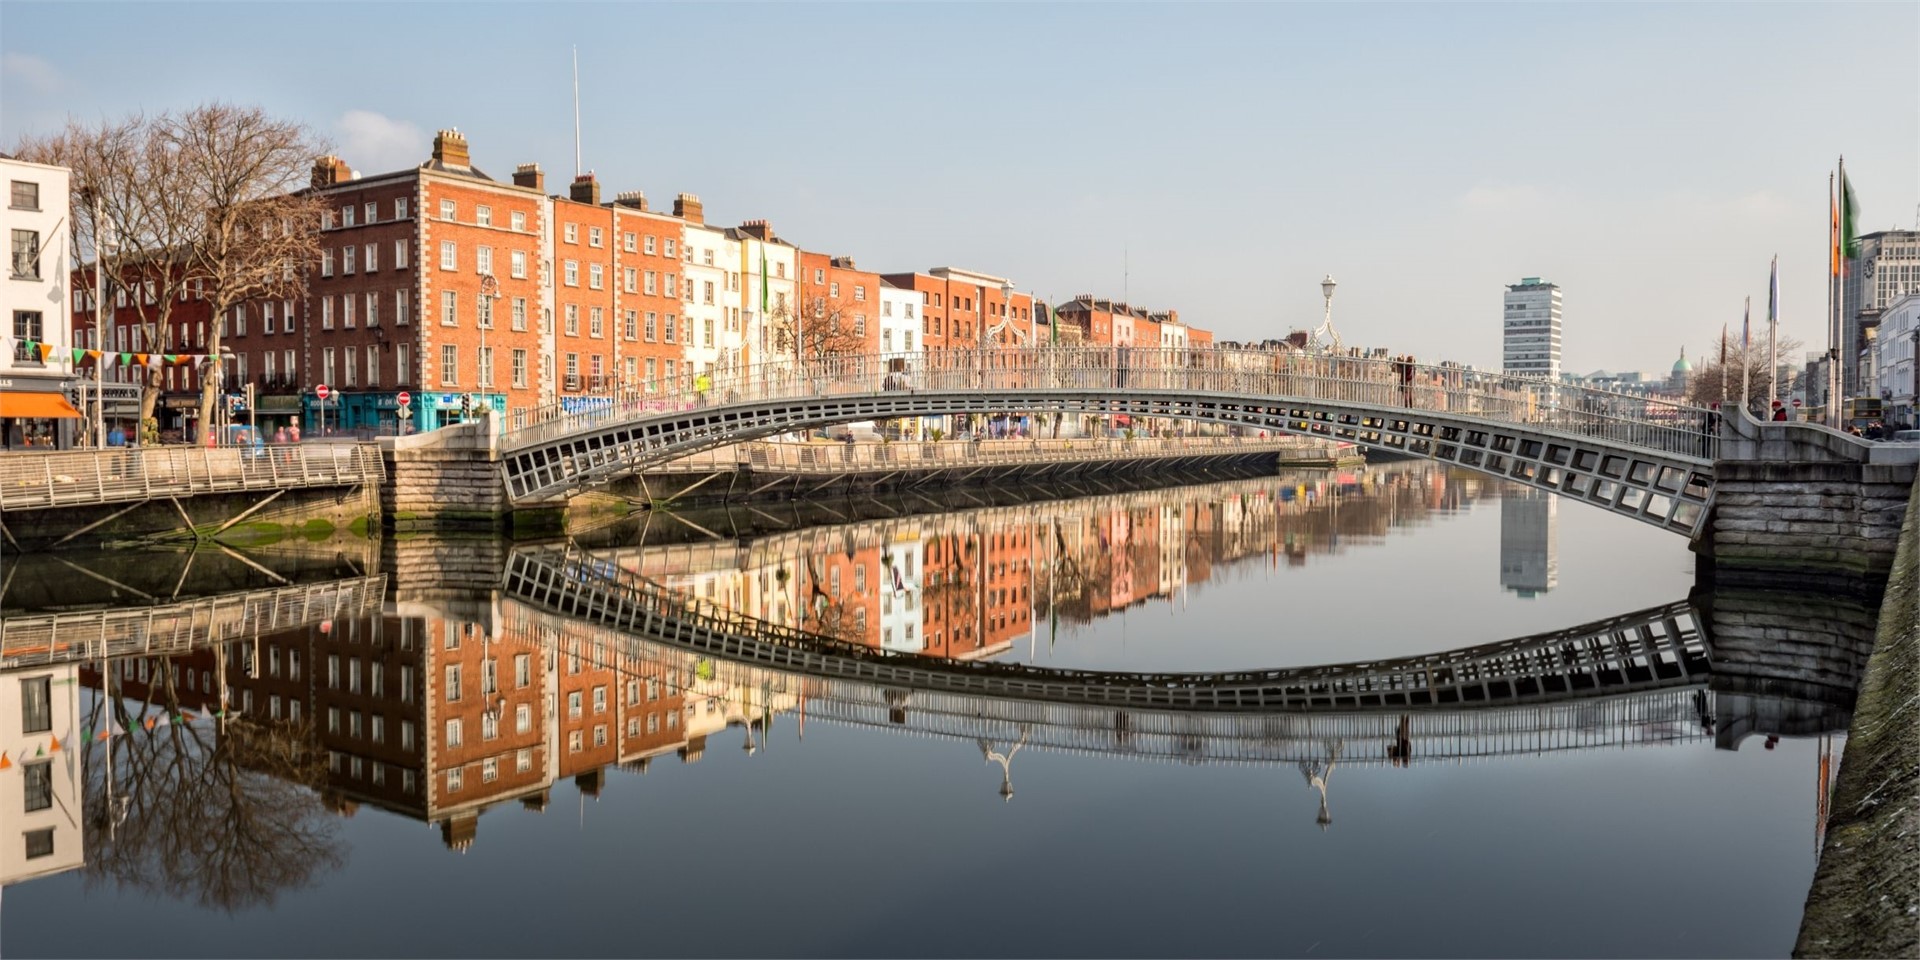 Hotels and accommodation in Dublin, Ireland